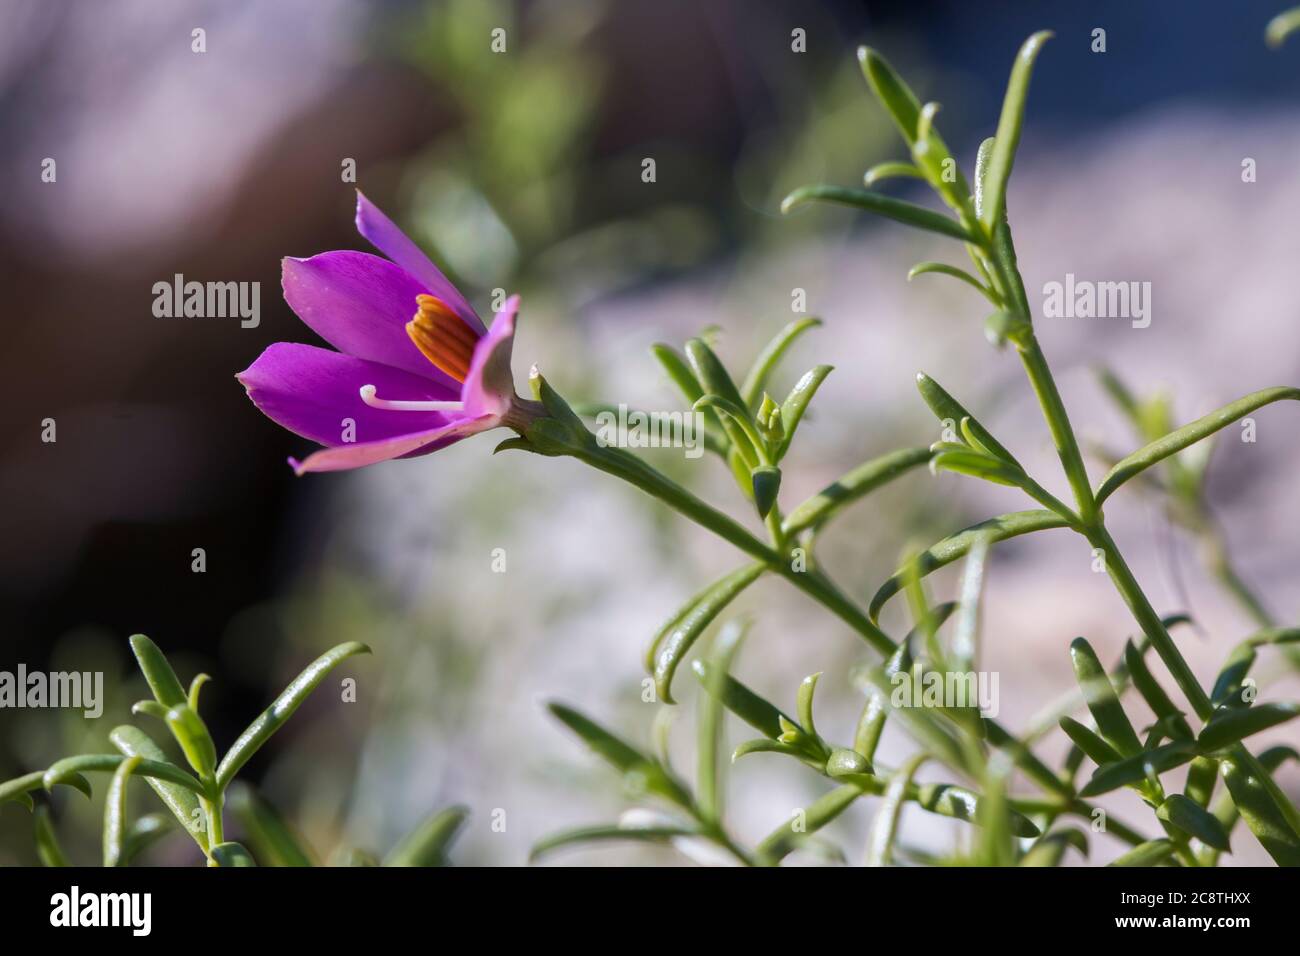 Chironia baccifera is a plant with a small pink flower blooming in the sunlight Stock Photo